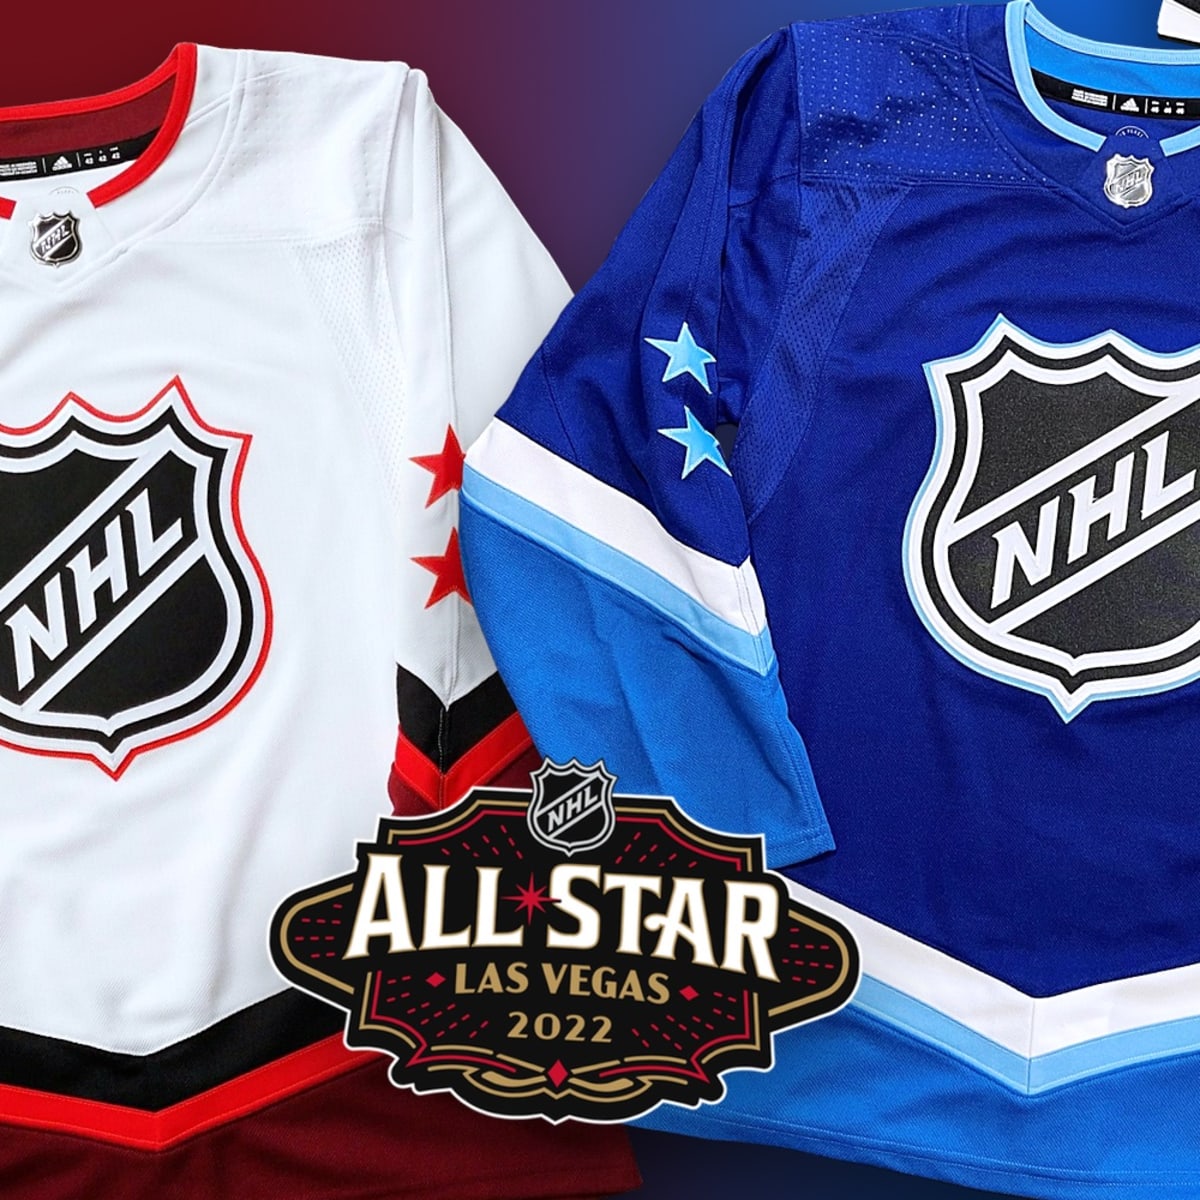 all star game 2022 uniforms